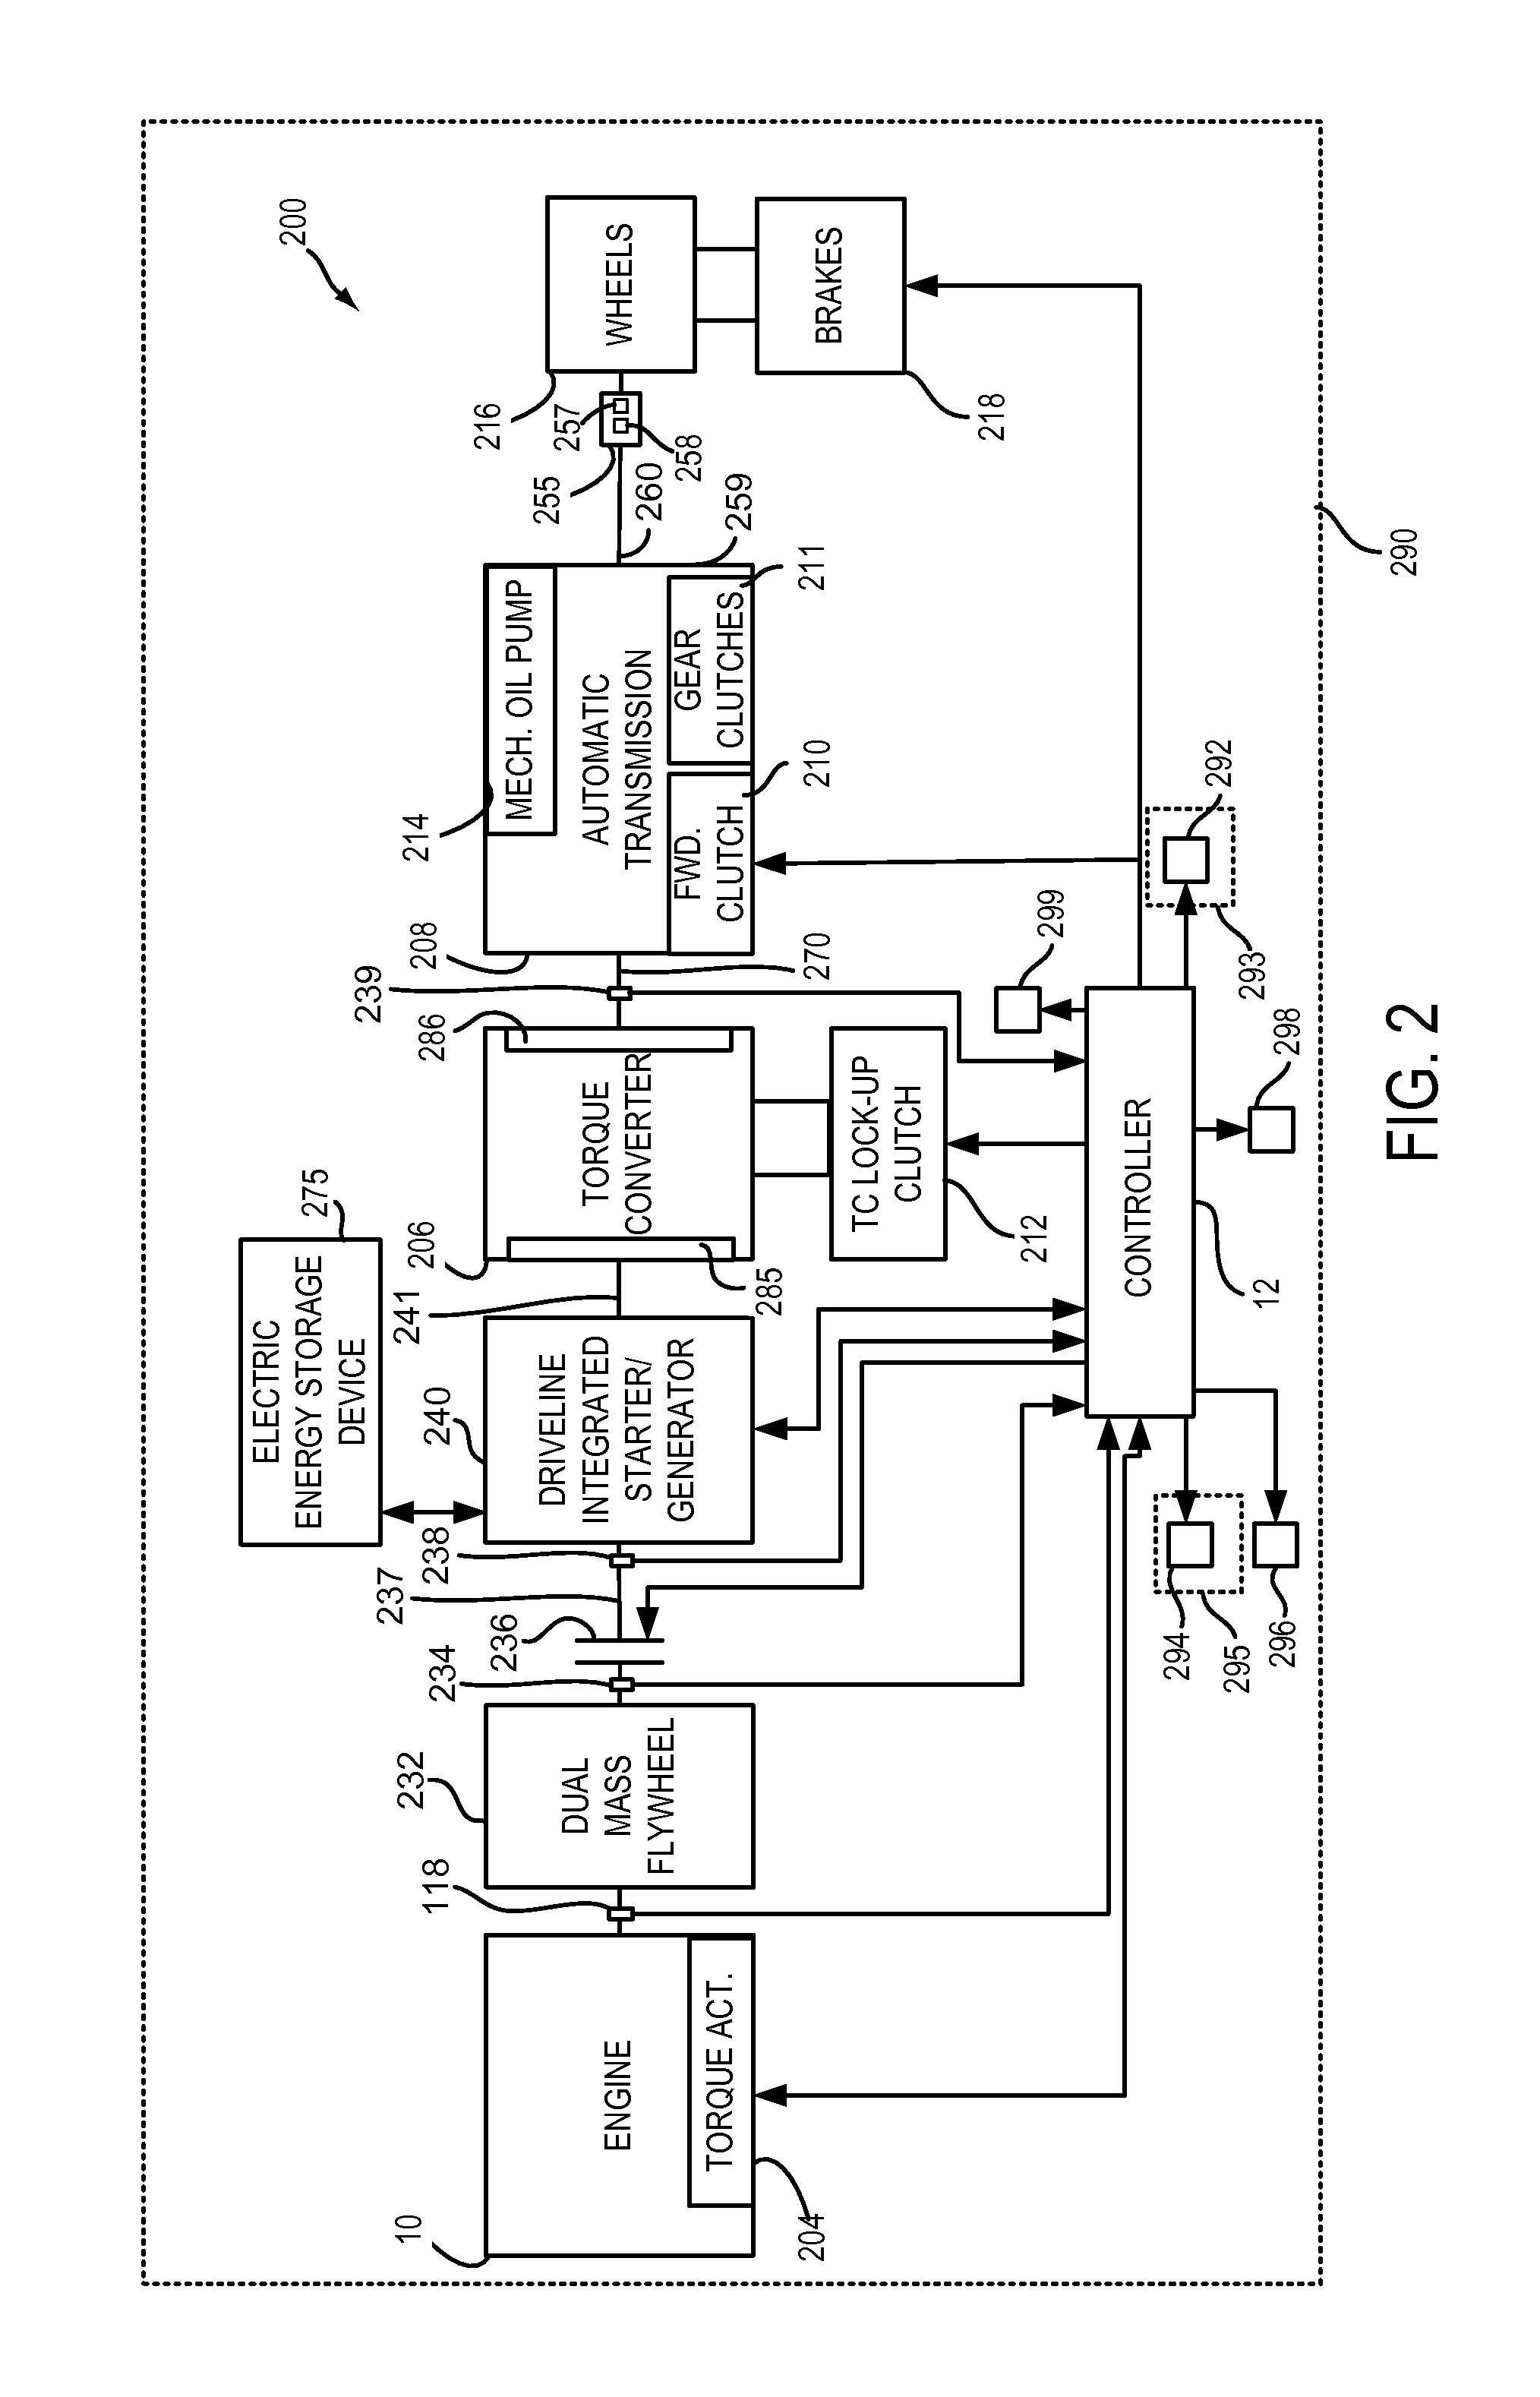 Methods and systems for engine starting during a shift